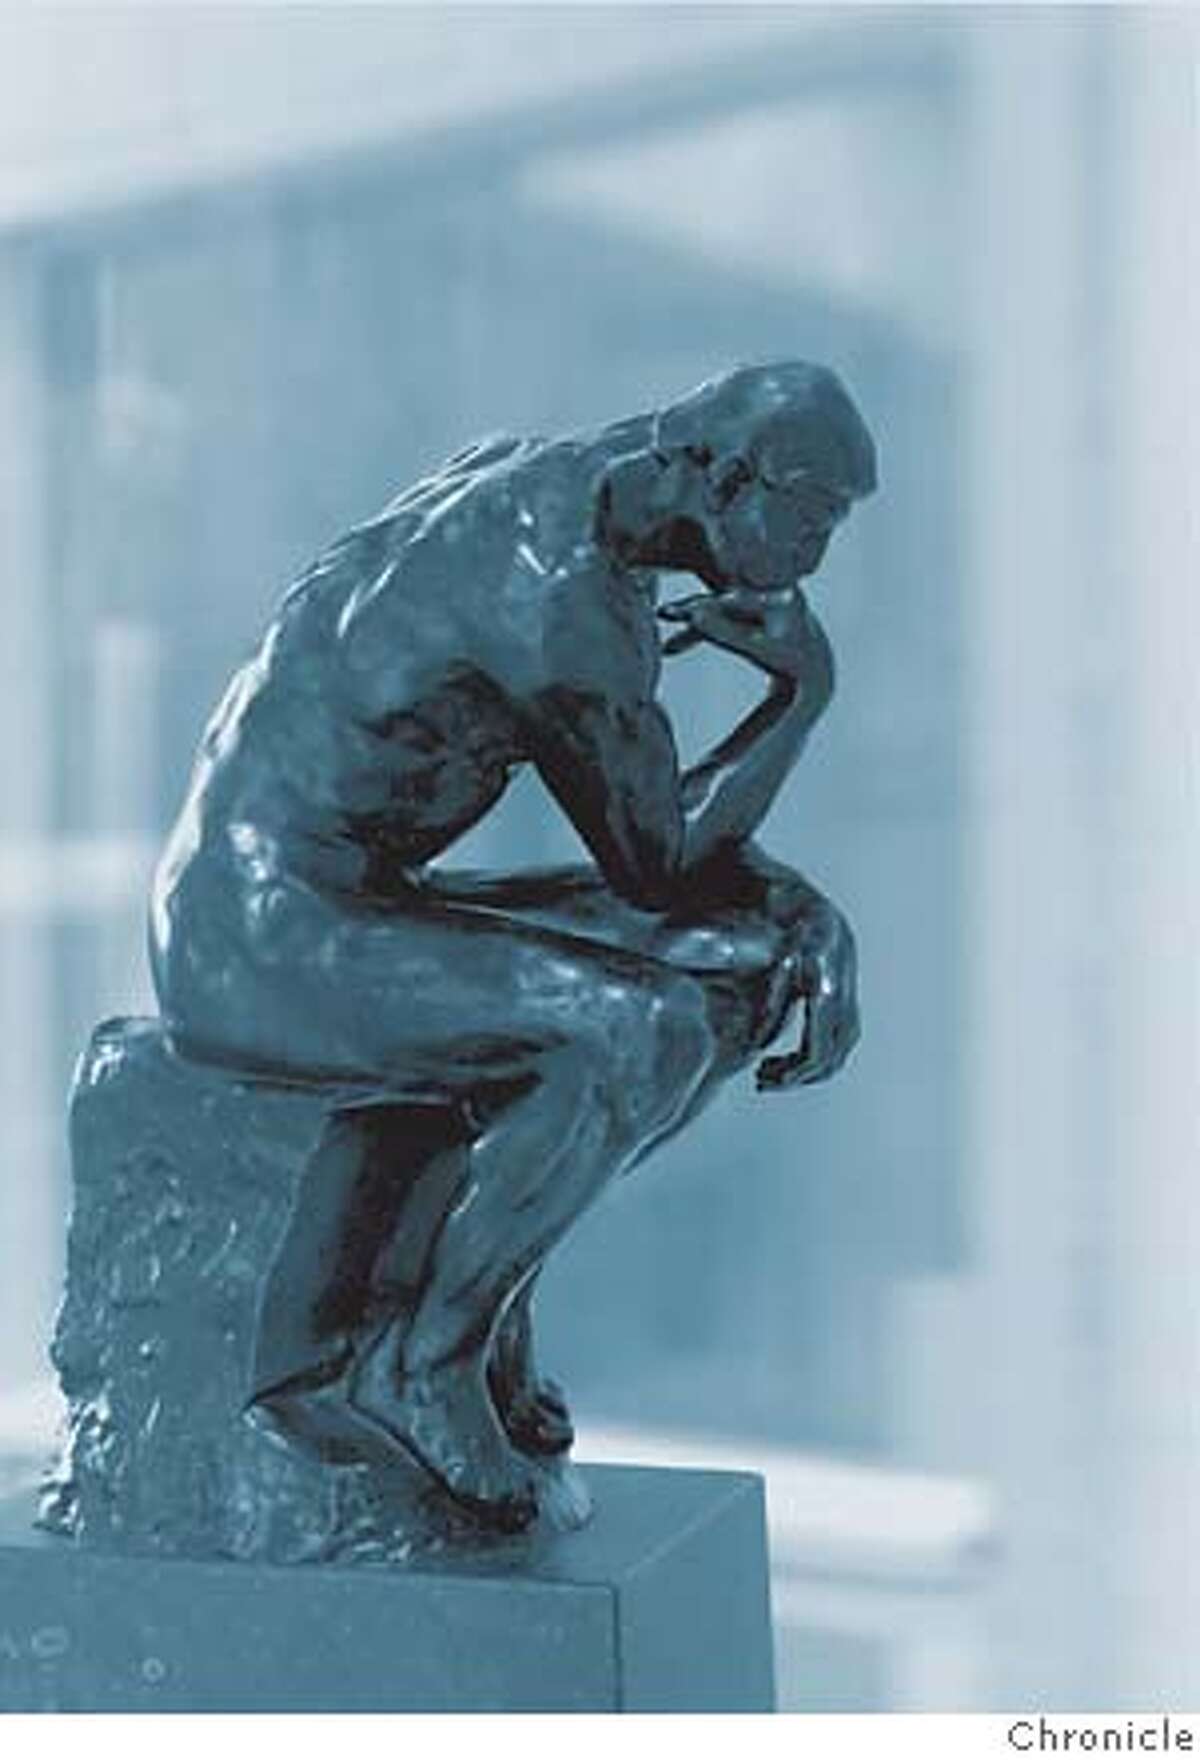 photo illustration for Steven Winn column on unconscious thinking in art. Chronicle__COLLECTING12F-C-31JAN00-PK-JLT Rodin's 1904 sculpture "Le Penseur" is part of the collection of Allan Rappaport, M.D. of Tiburon, CA._25 Rolling Hills Road - Tiburon, CA_PHOTO BY JERRY TELFER/THE CHRONICLE__CAT Datebook#Datebook#Chronicle#05/28/2007#ALL#5star#E1#0497001748